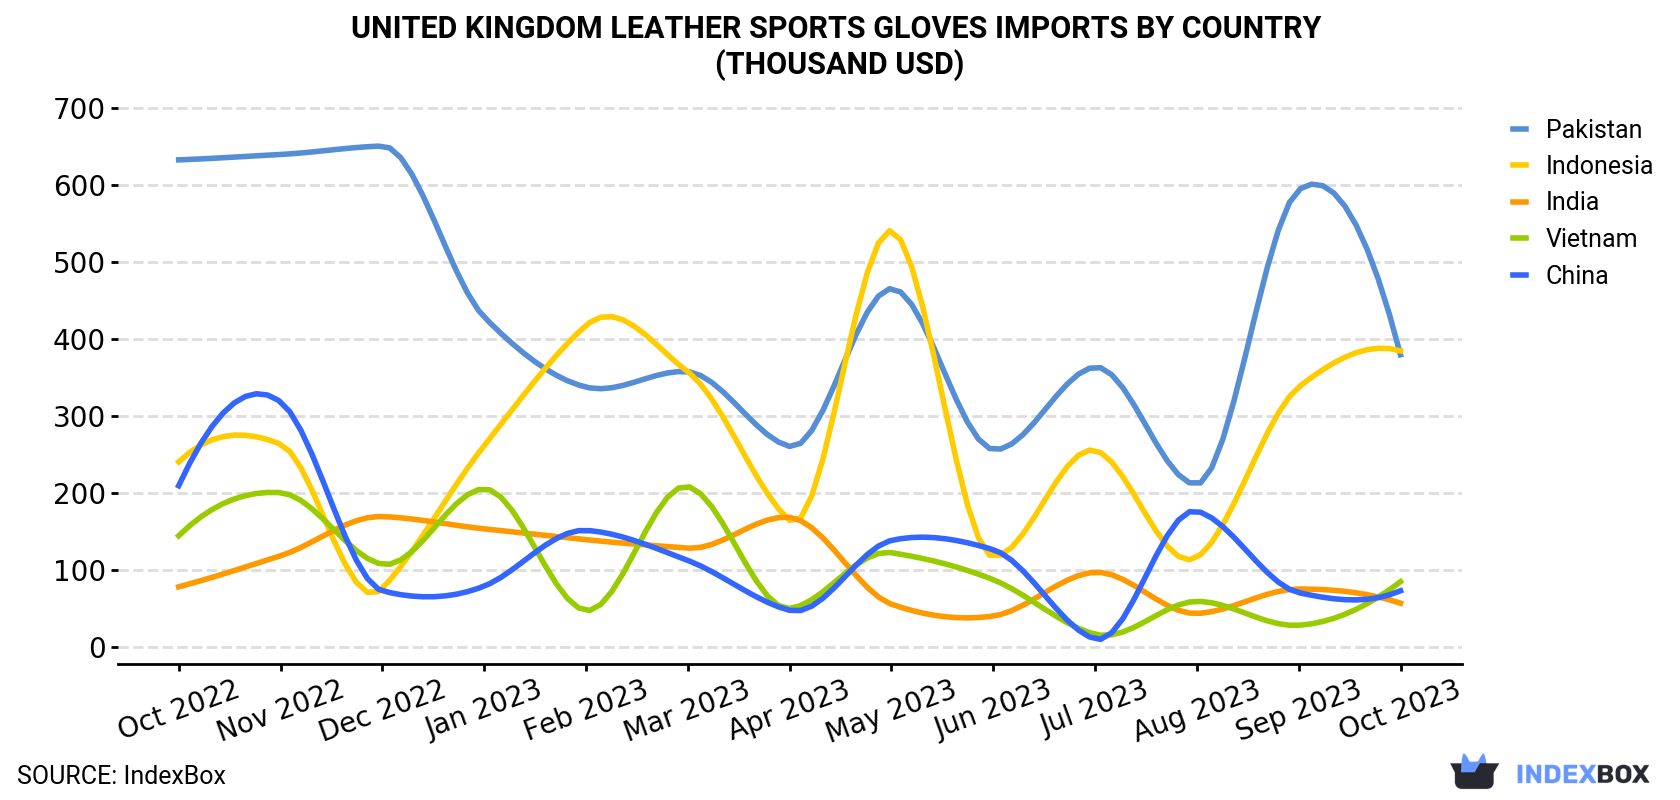 United Kingdom Leather Sports Gloves Imports By Country (Thousand USD)